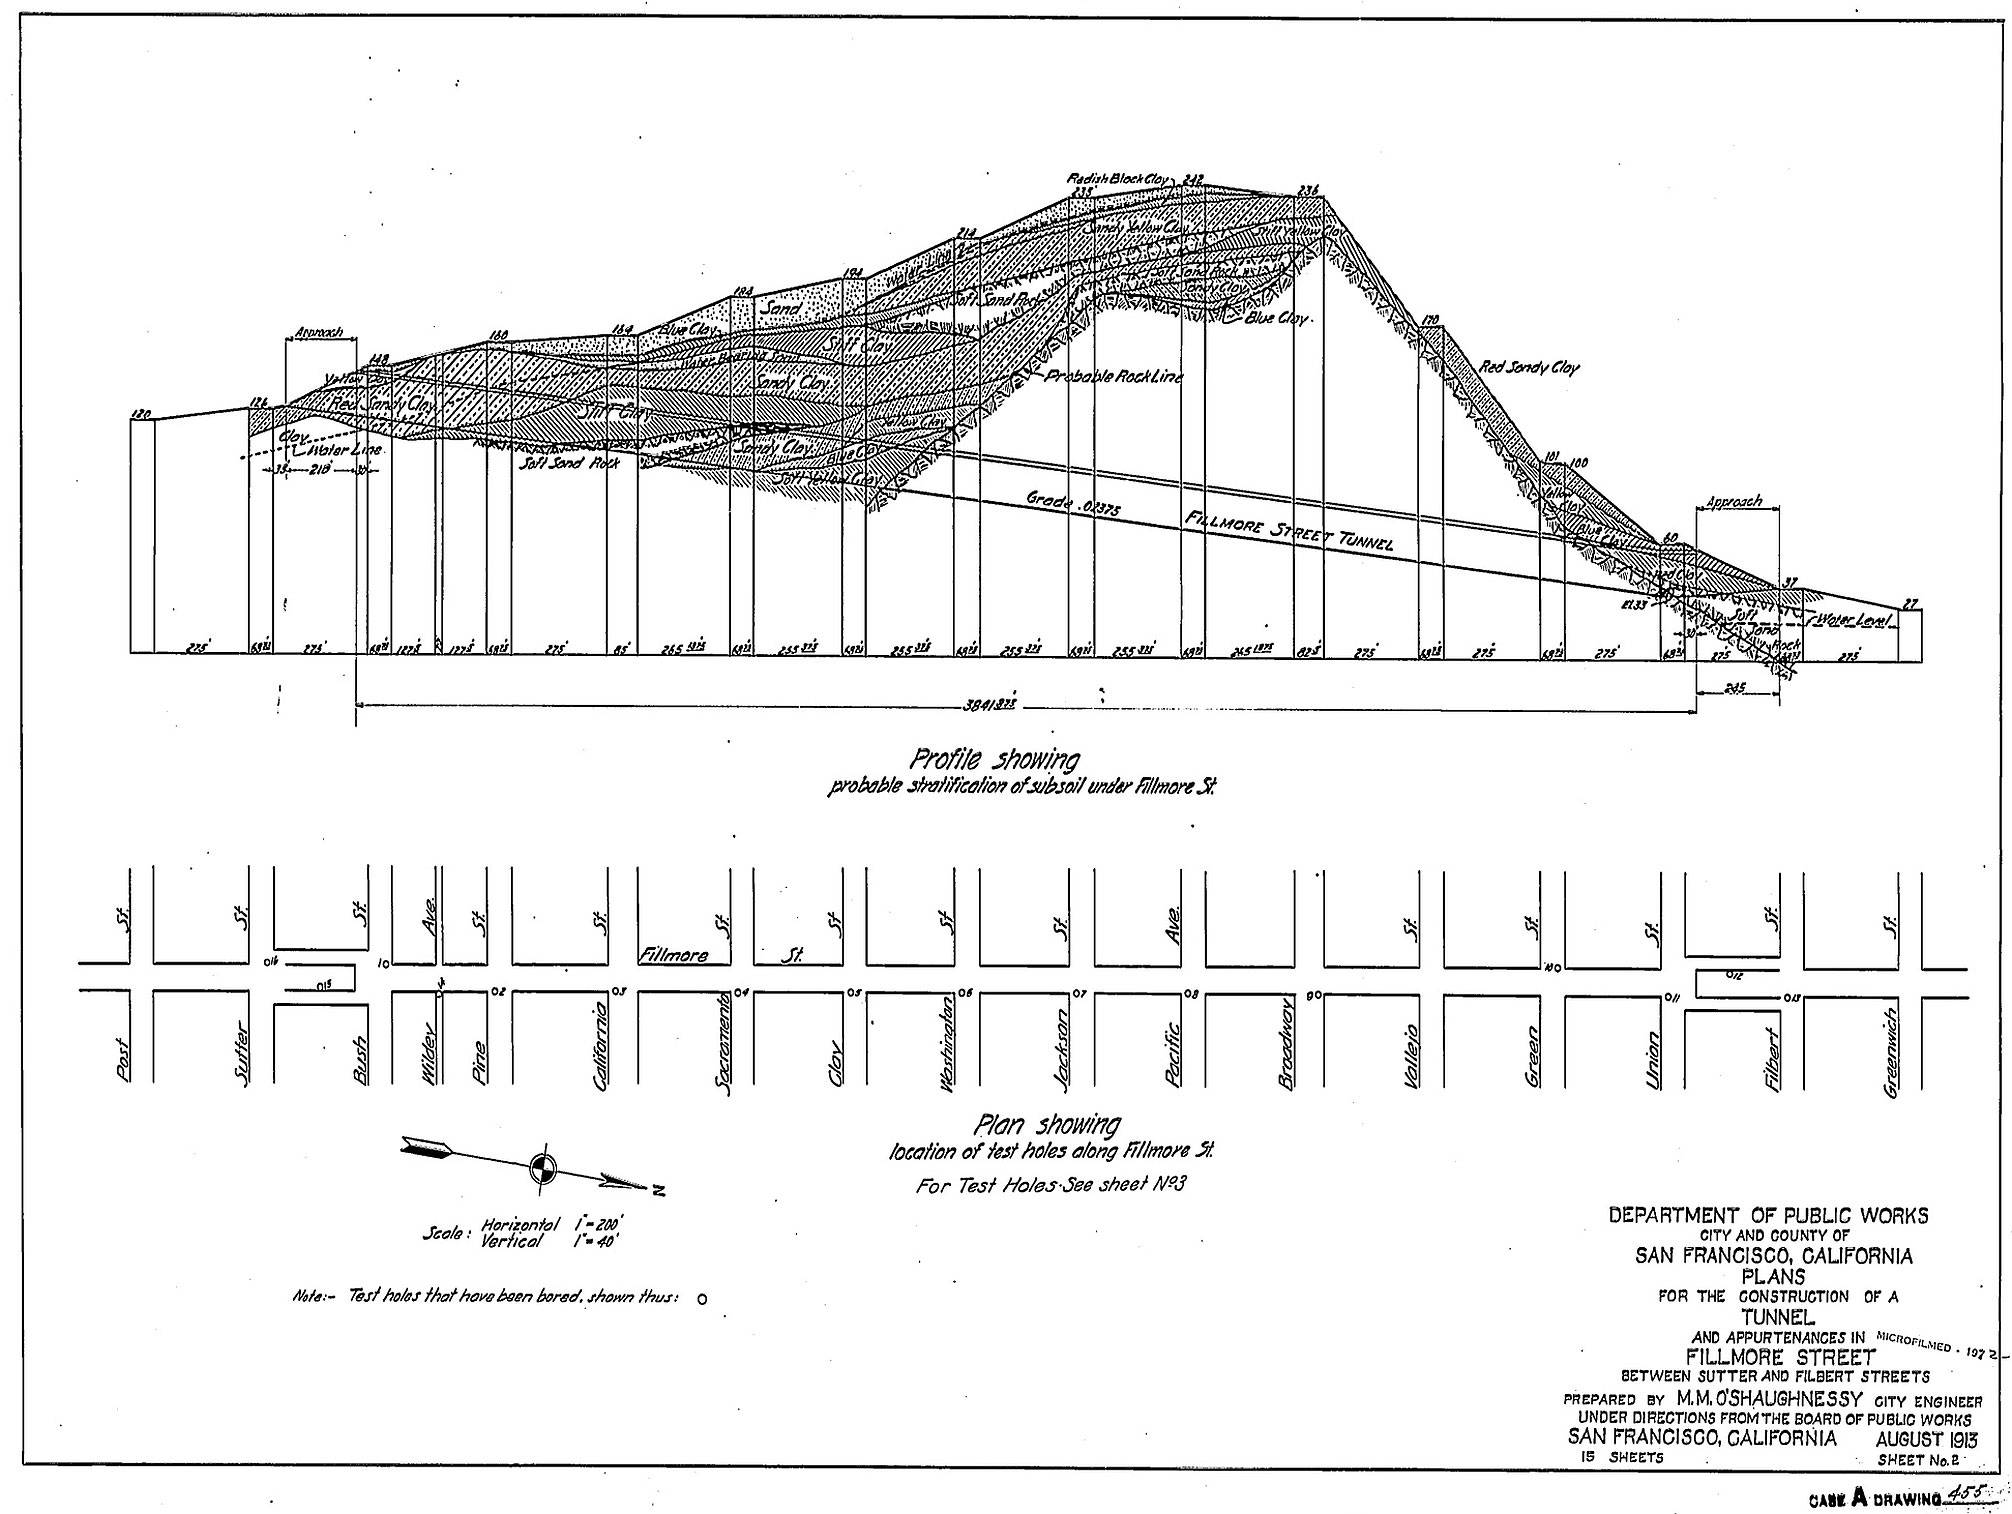 Aug-1915-Fillmore-Street-Tunnel-plan-showing-geology-and-elevation.jpg